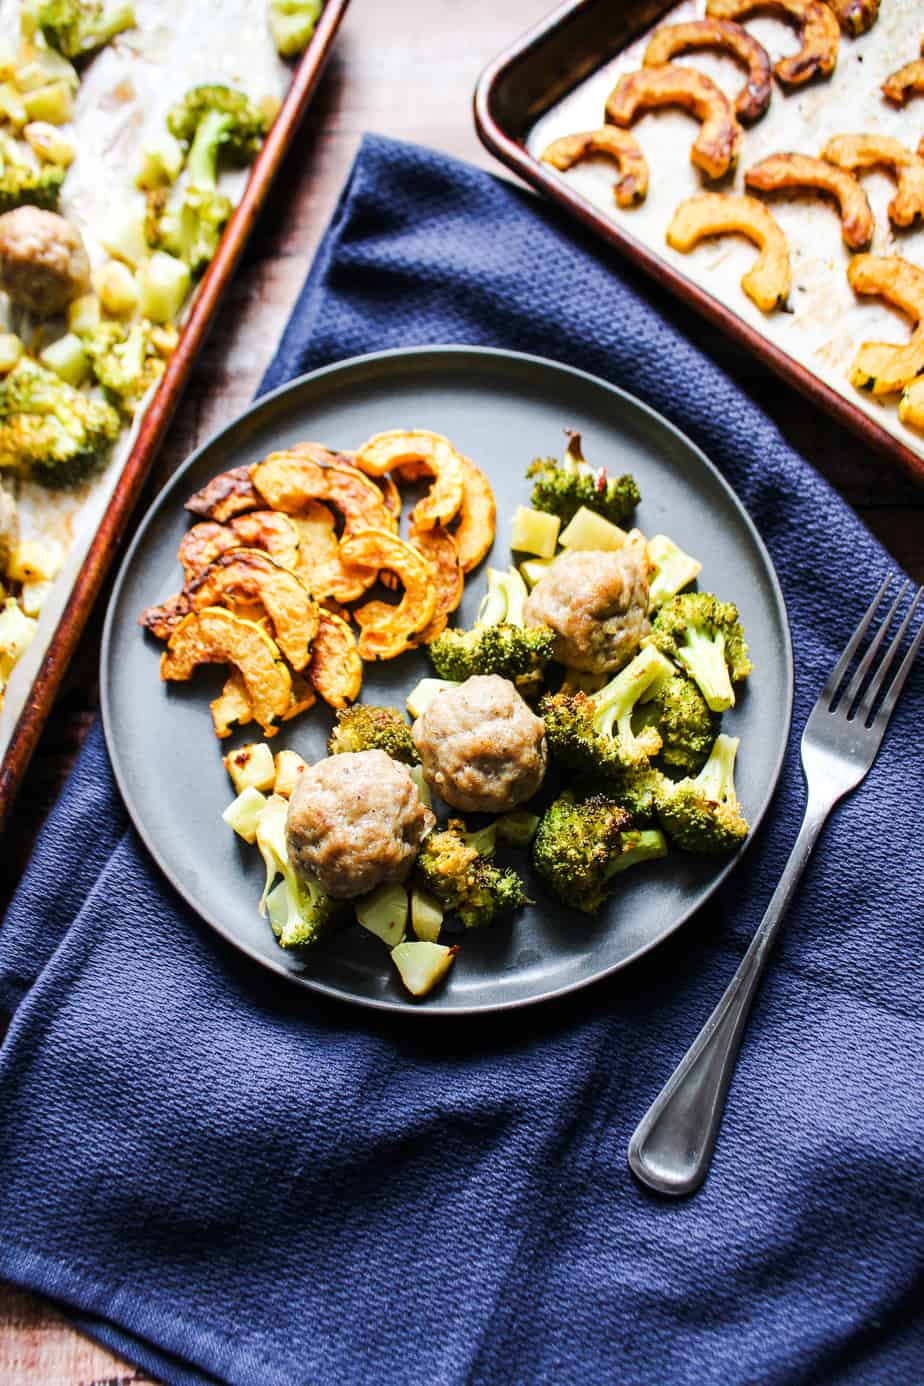 blue napkin with gray plate containing roasted delicata, broccoli, and sausage balls